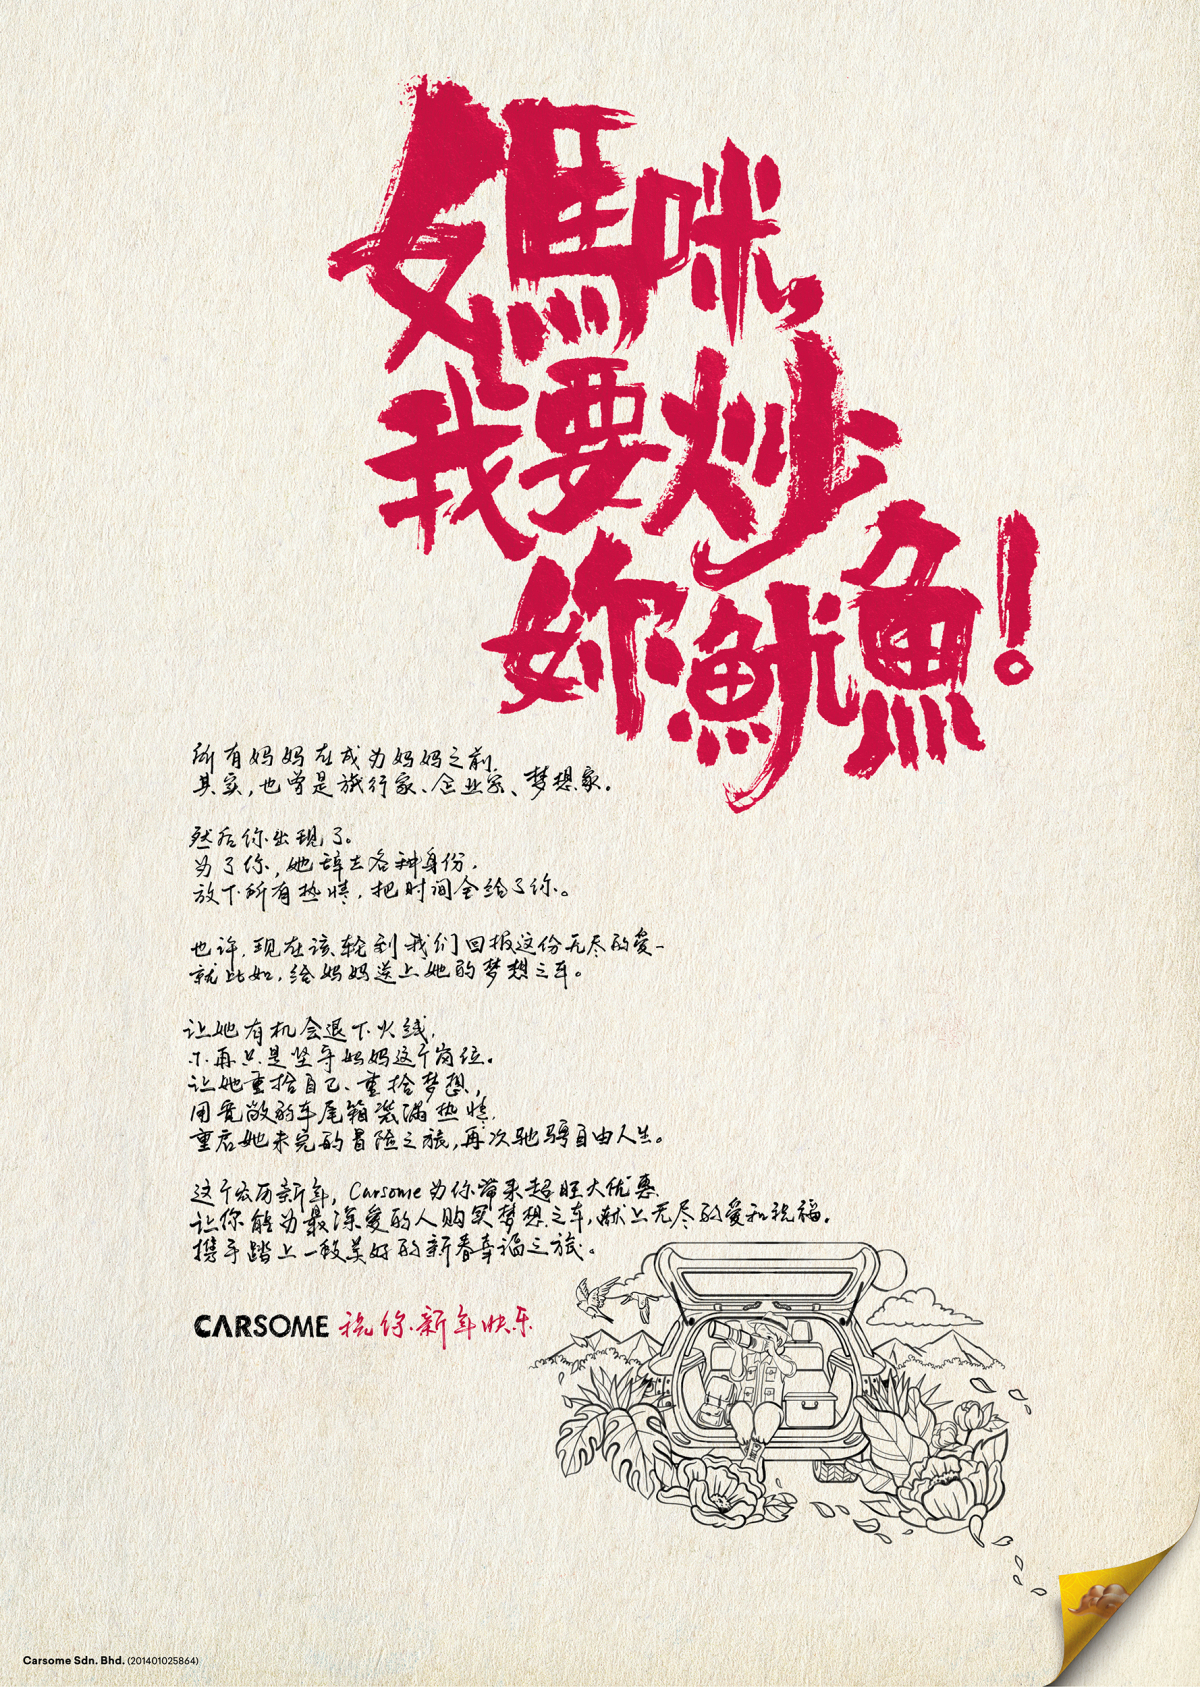 Carsome's Rudest Chinese New Year's Ads - Mother.jp